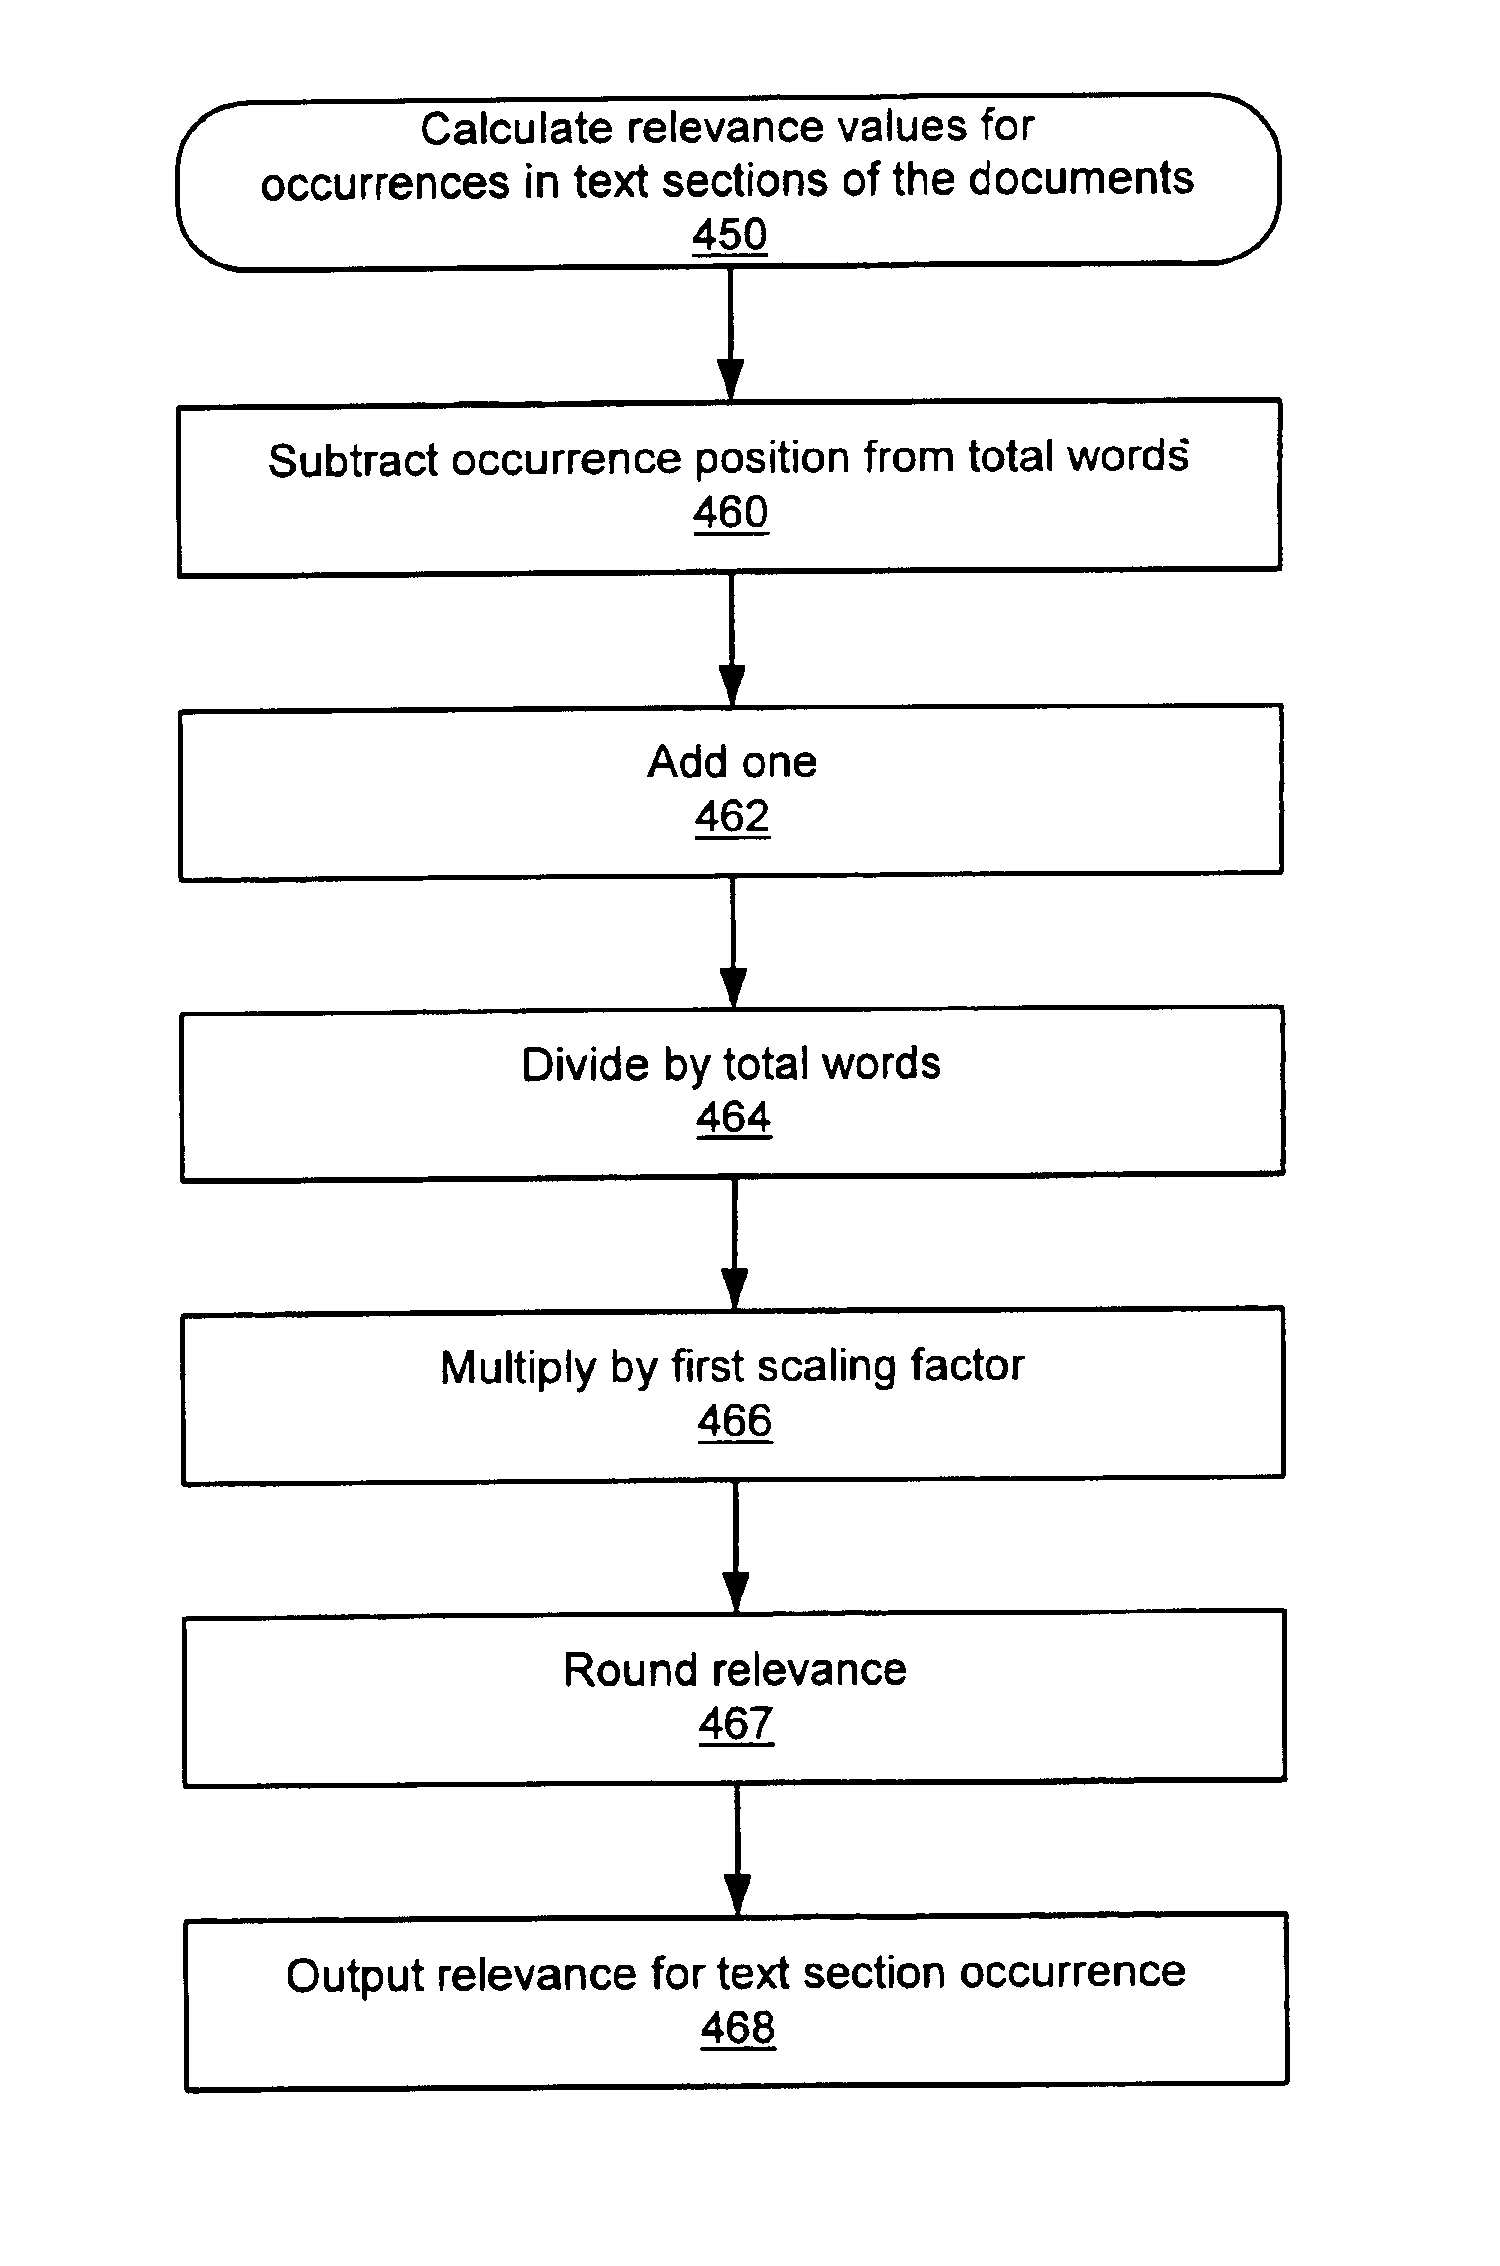 Relevance calculation for a reference system in an insurance claims processing system